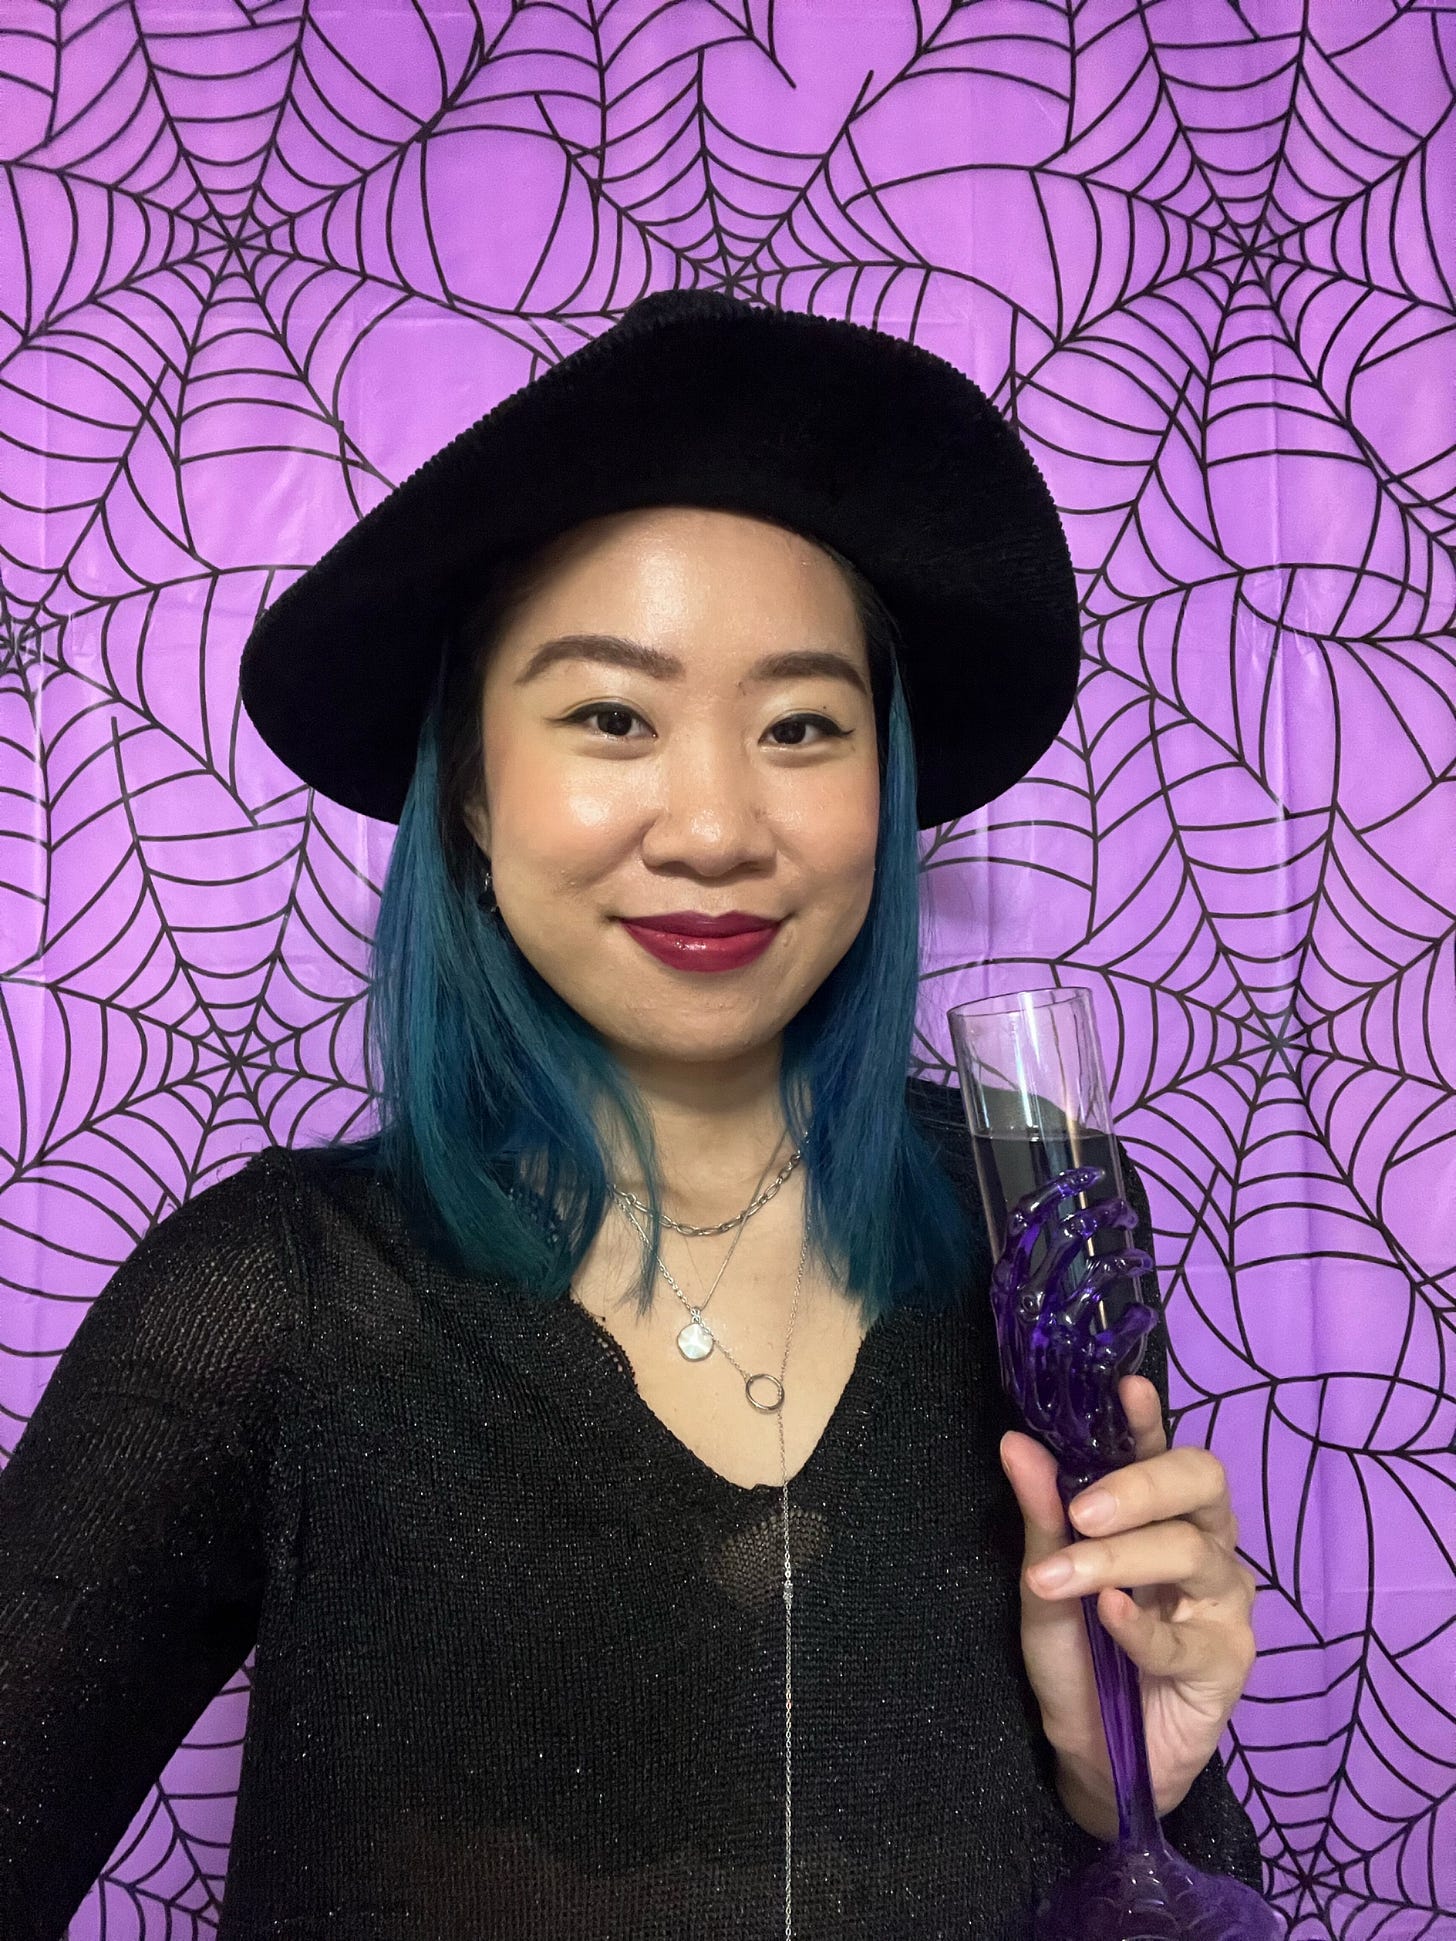 Teresa Tran halloween picture against a purple spider themed background